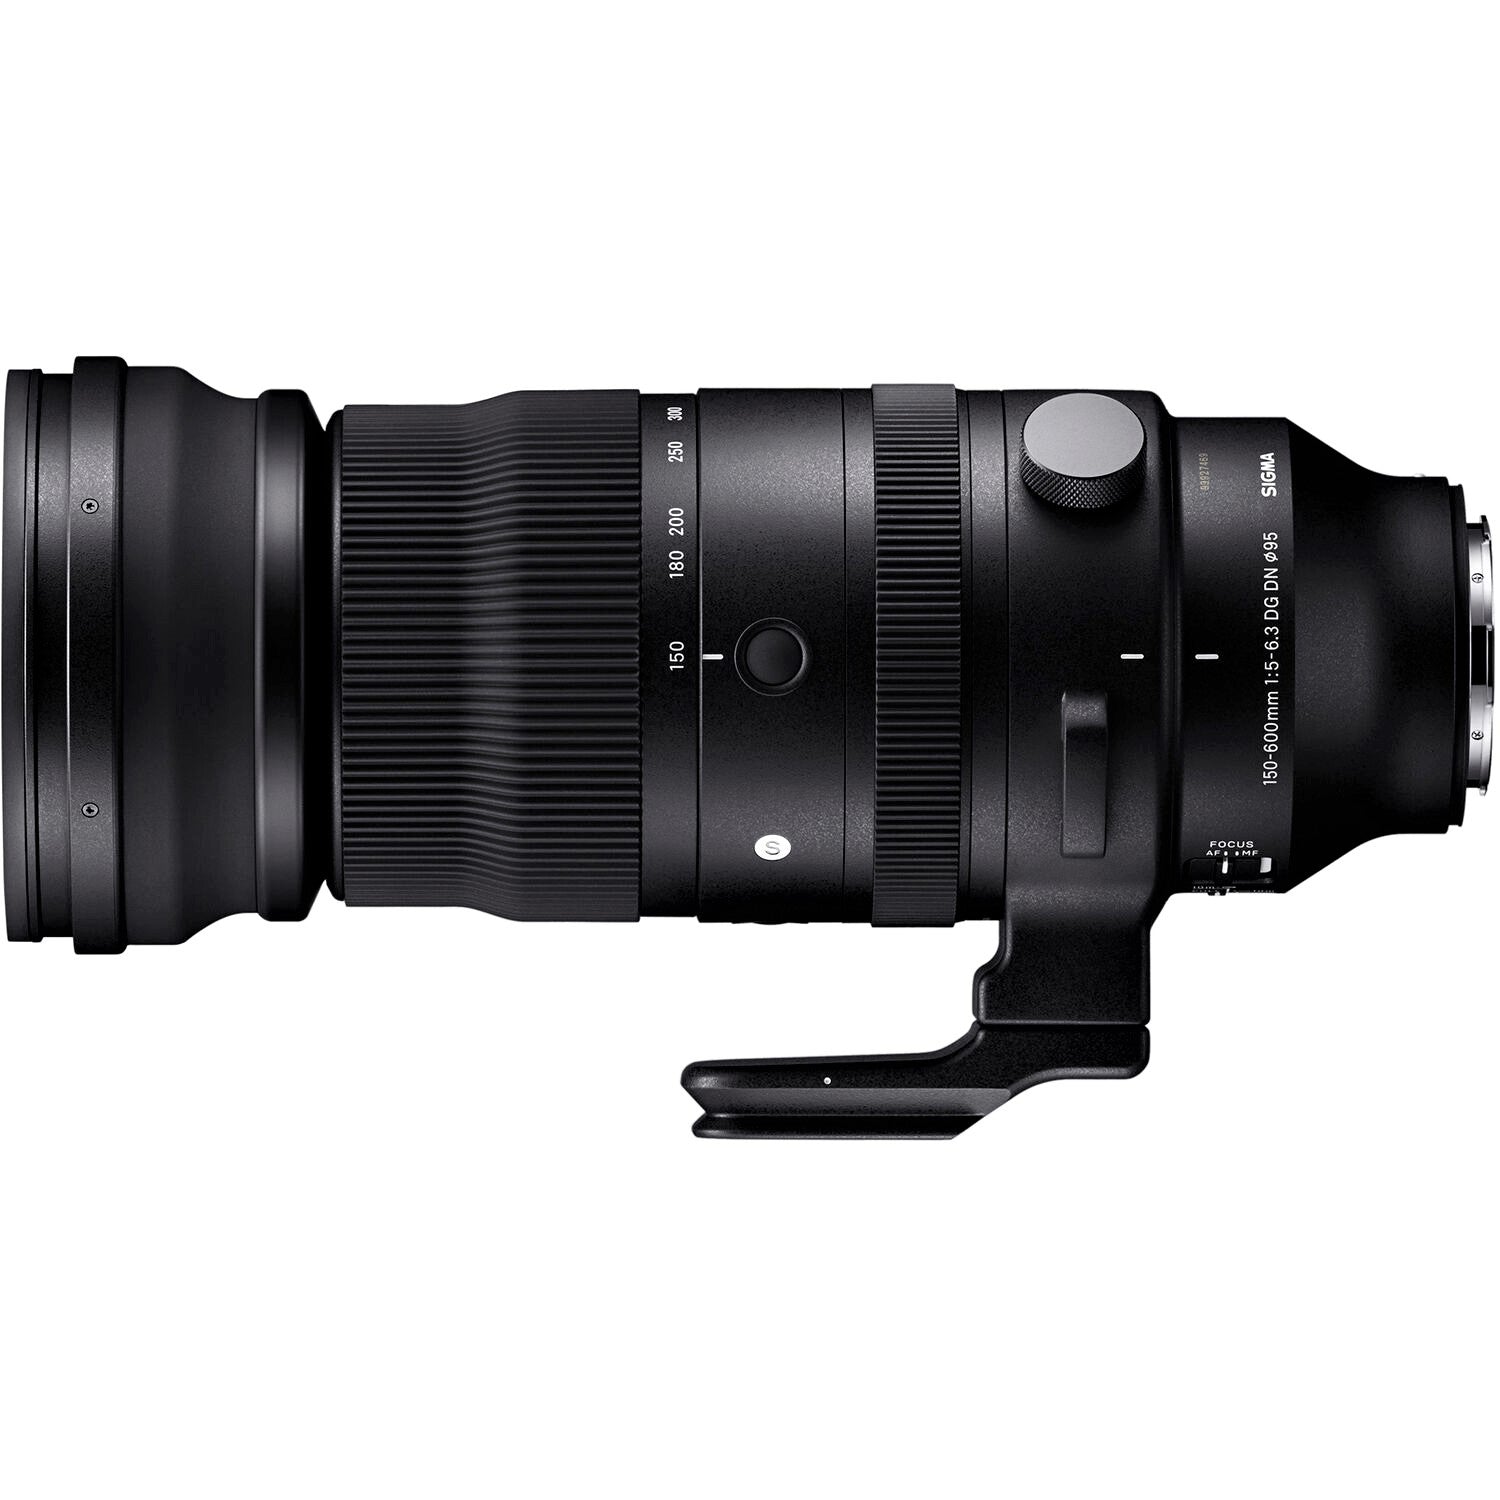 Sigma 150-600mm F5-6.3 DG DN OS Sports Lens (Sony E Mount) with Attached Tripod Socket